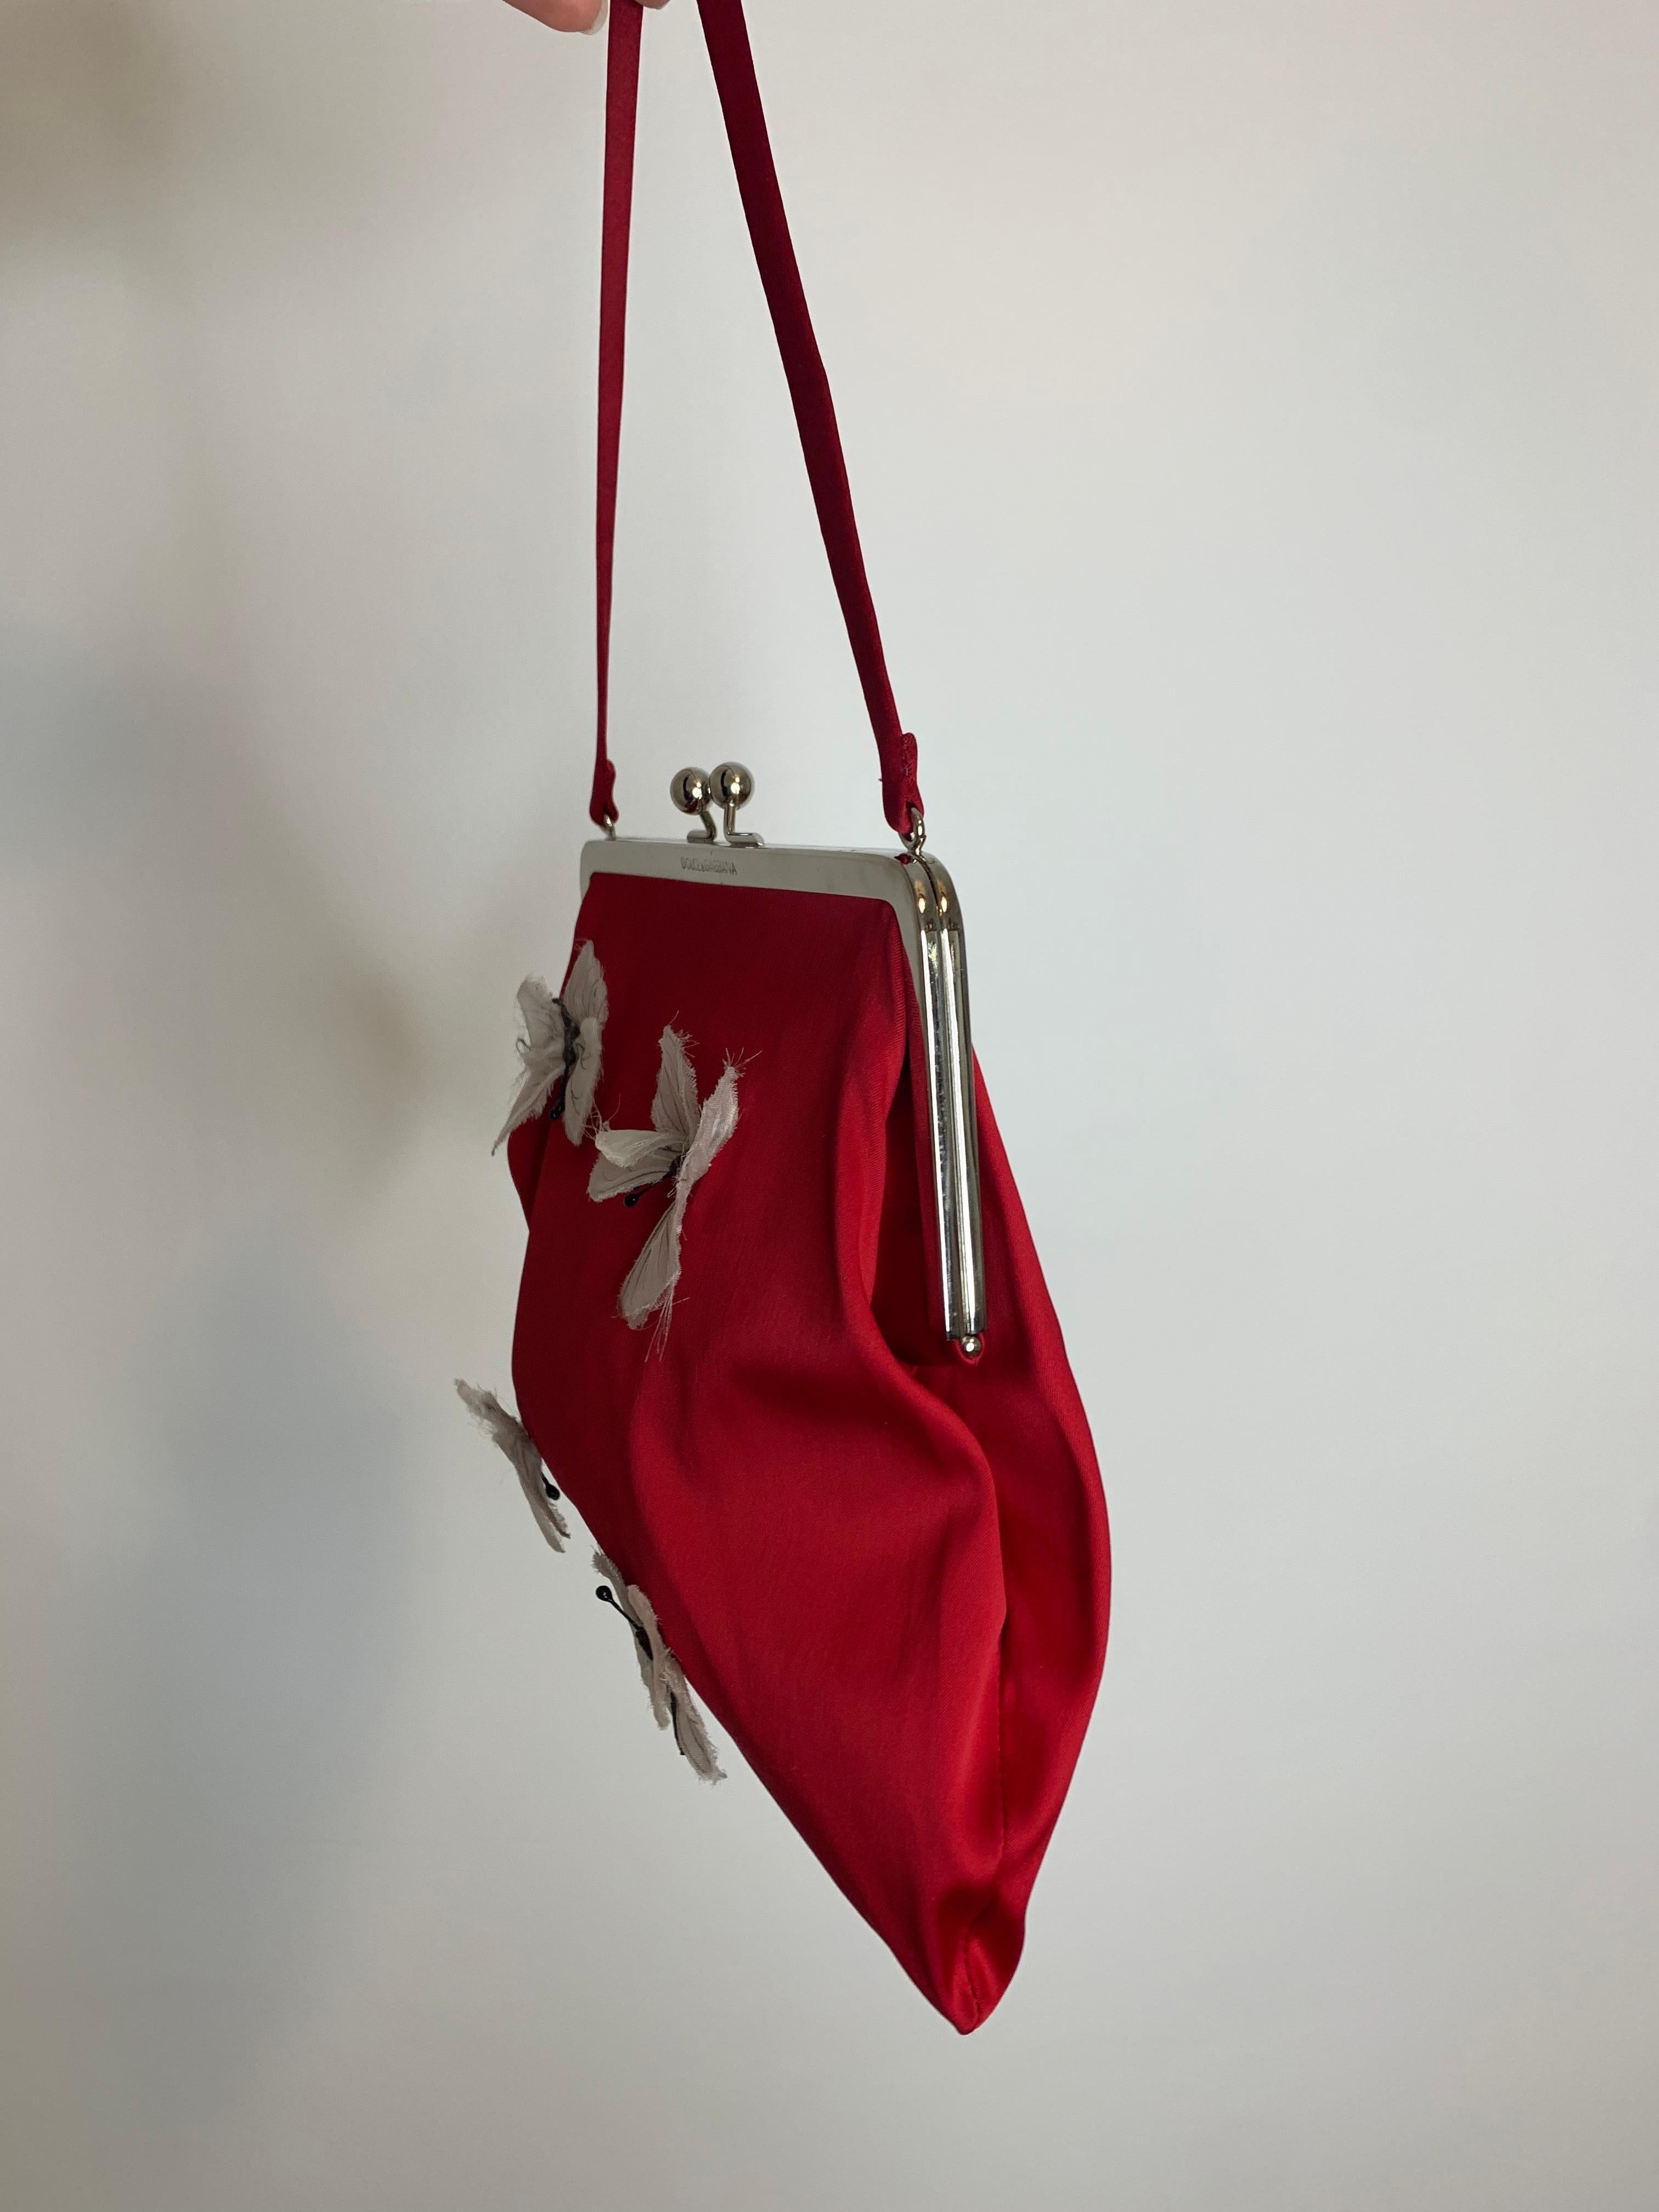 Iconic and rare Dolce Gabbana red butterfly embellished bag from 1998 “Stromboli” collection 

Good vintage condition. Two tiny holes in the back (from a pin). See photos 